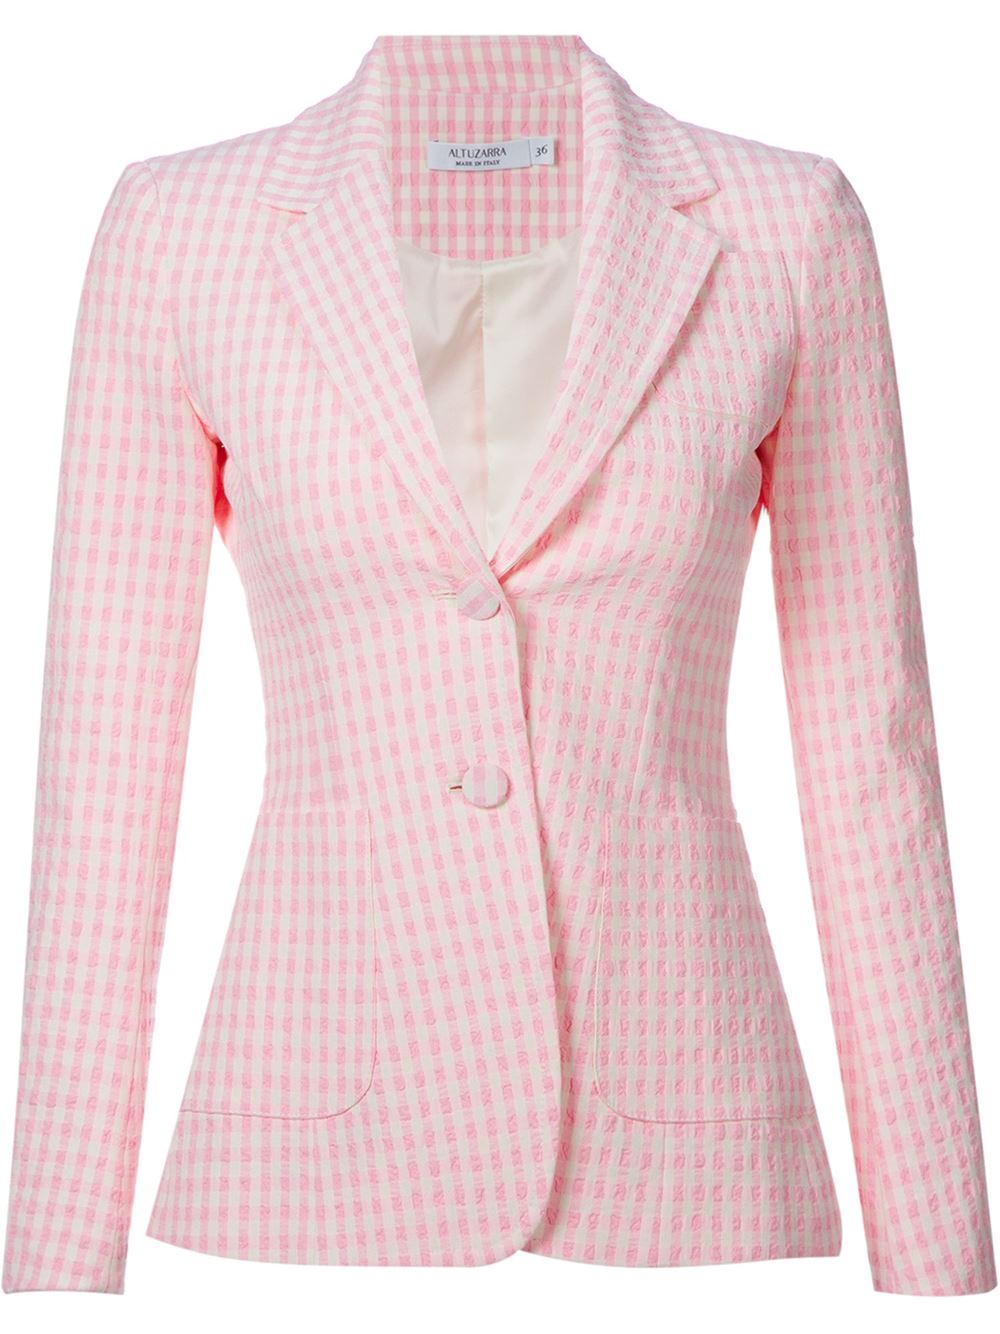 Fall 2018 New Ladies Gingham Checkered Blazer Suit + High